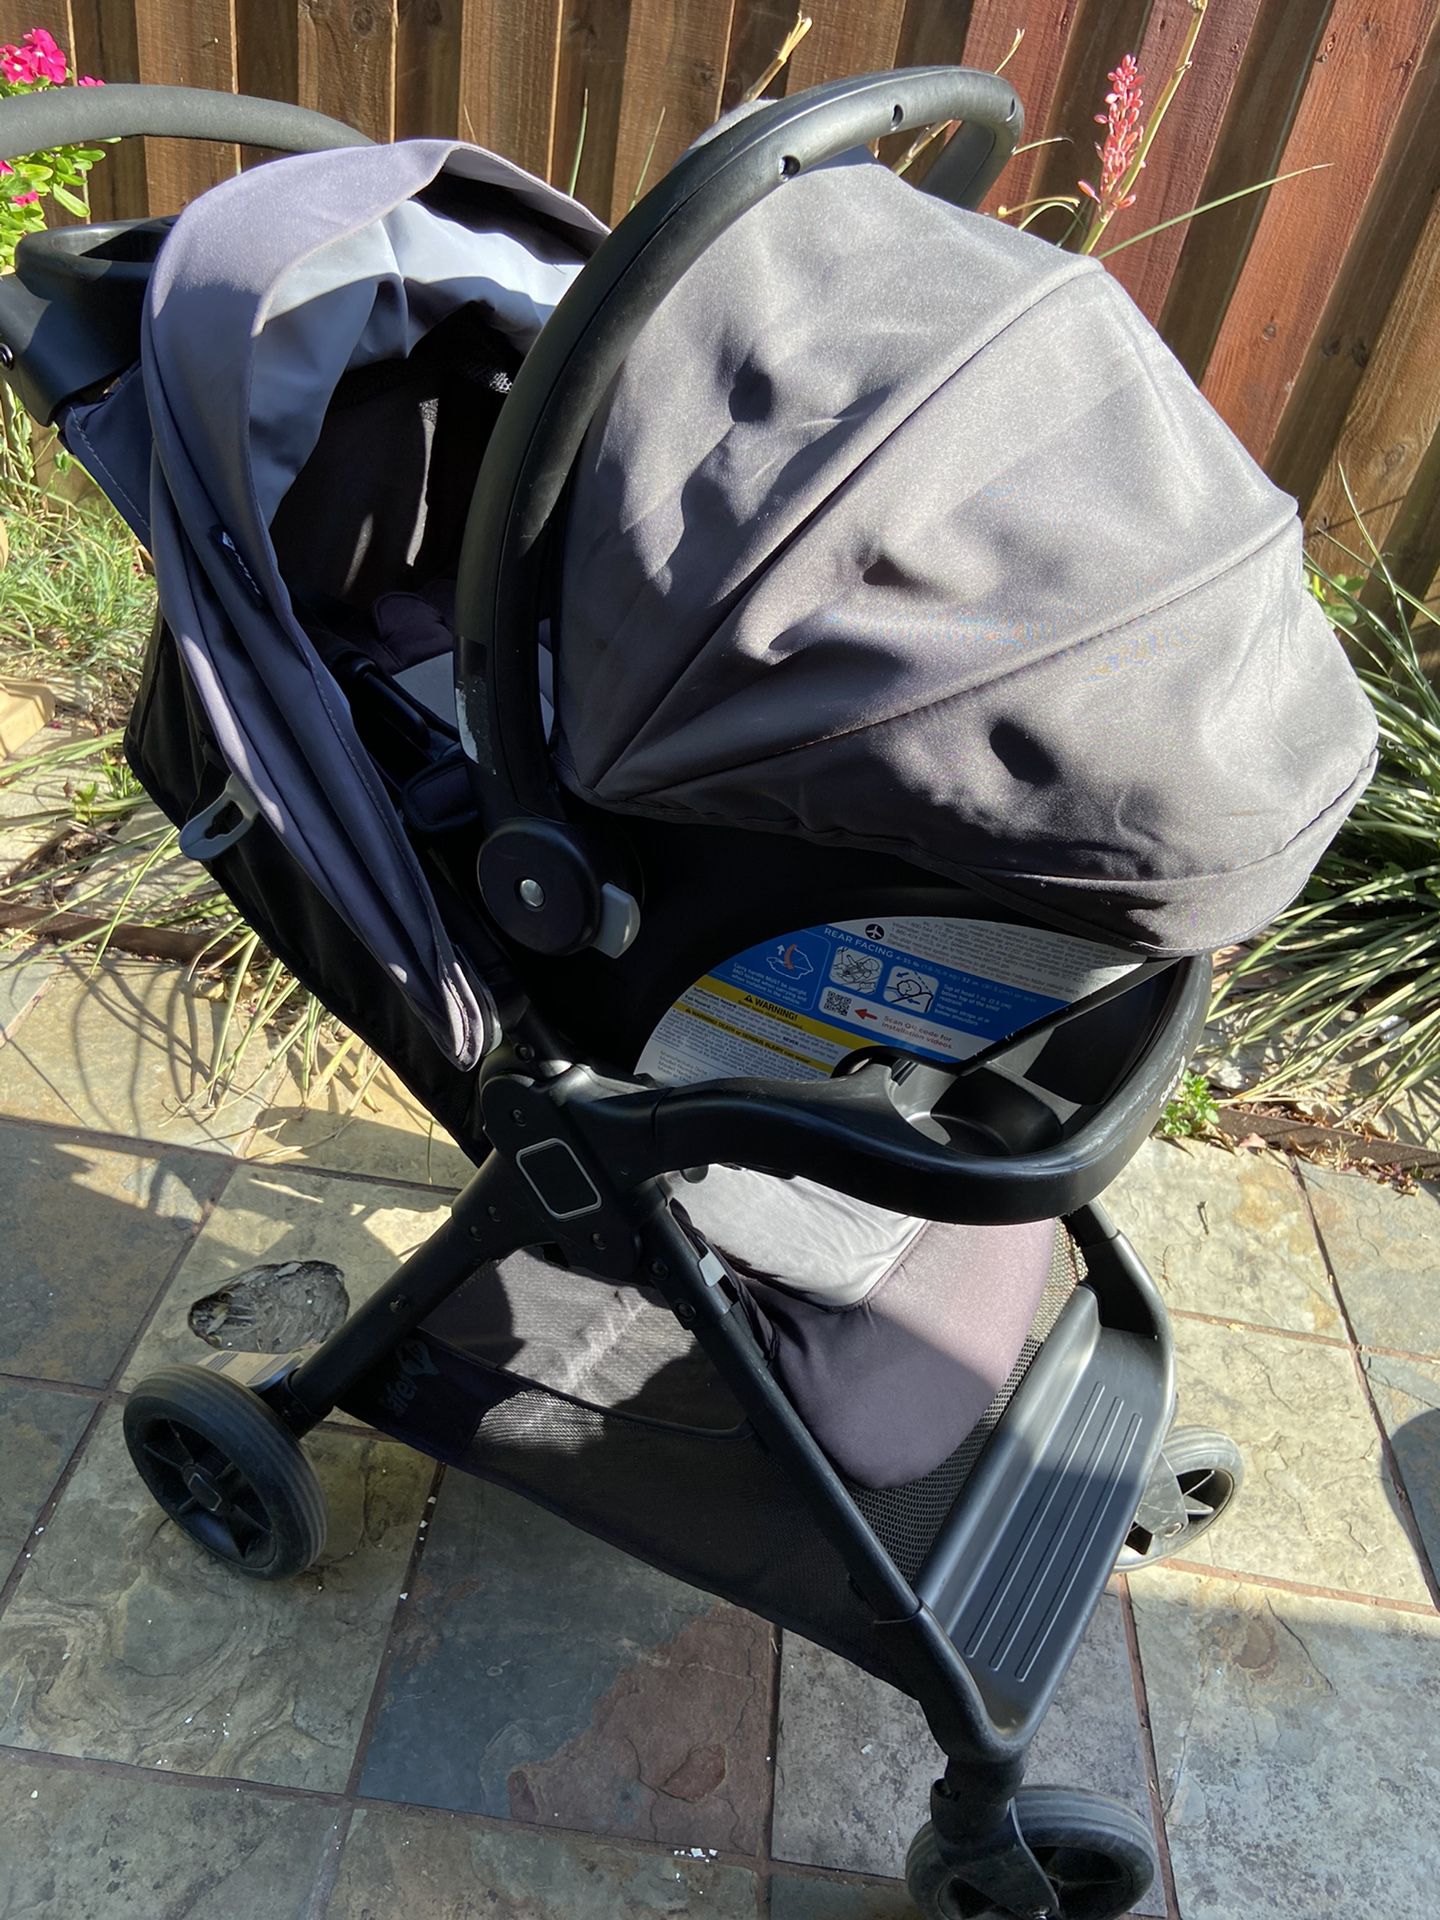 Safety 1st 35LT stroller and car seat